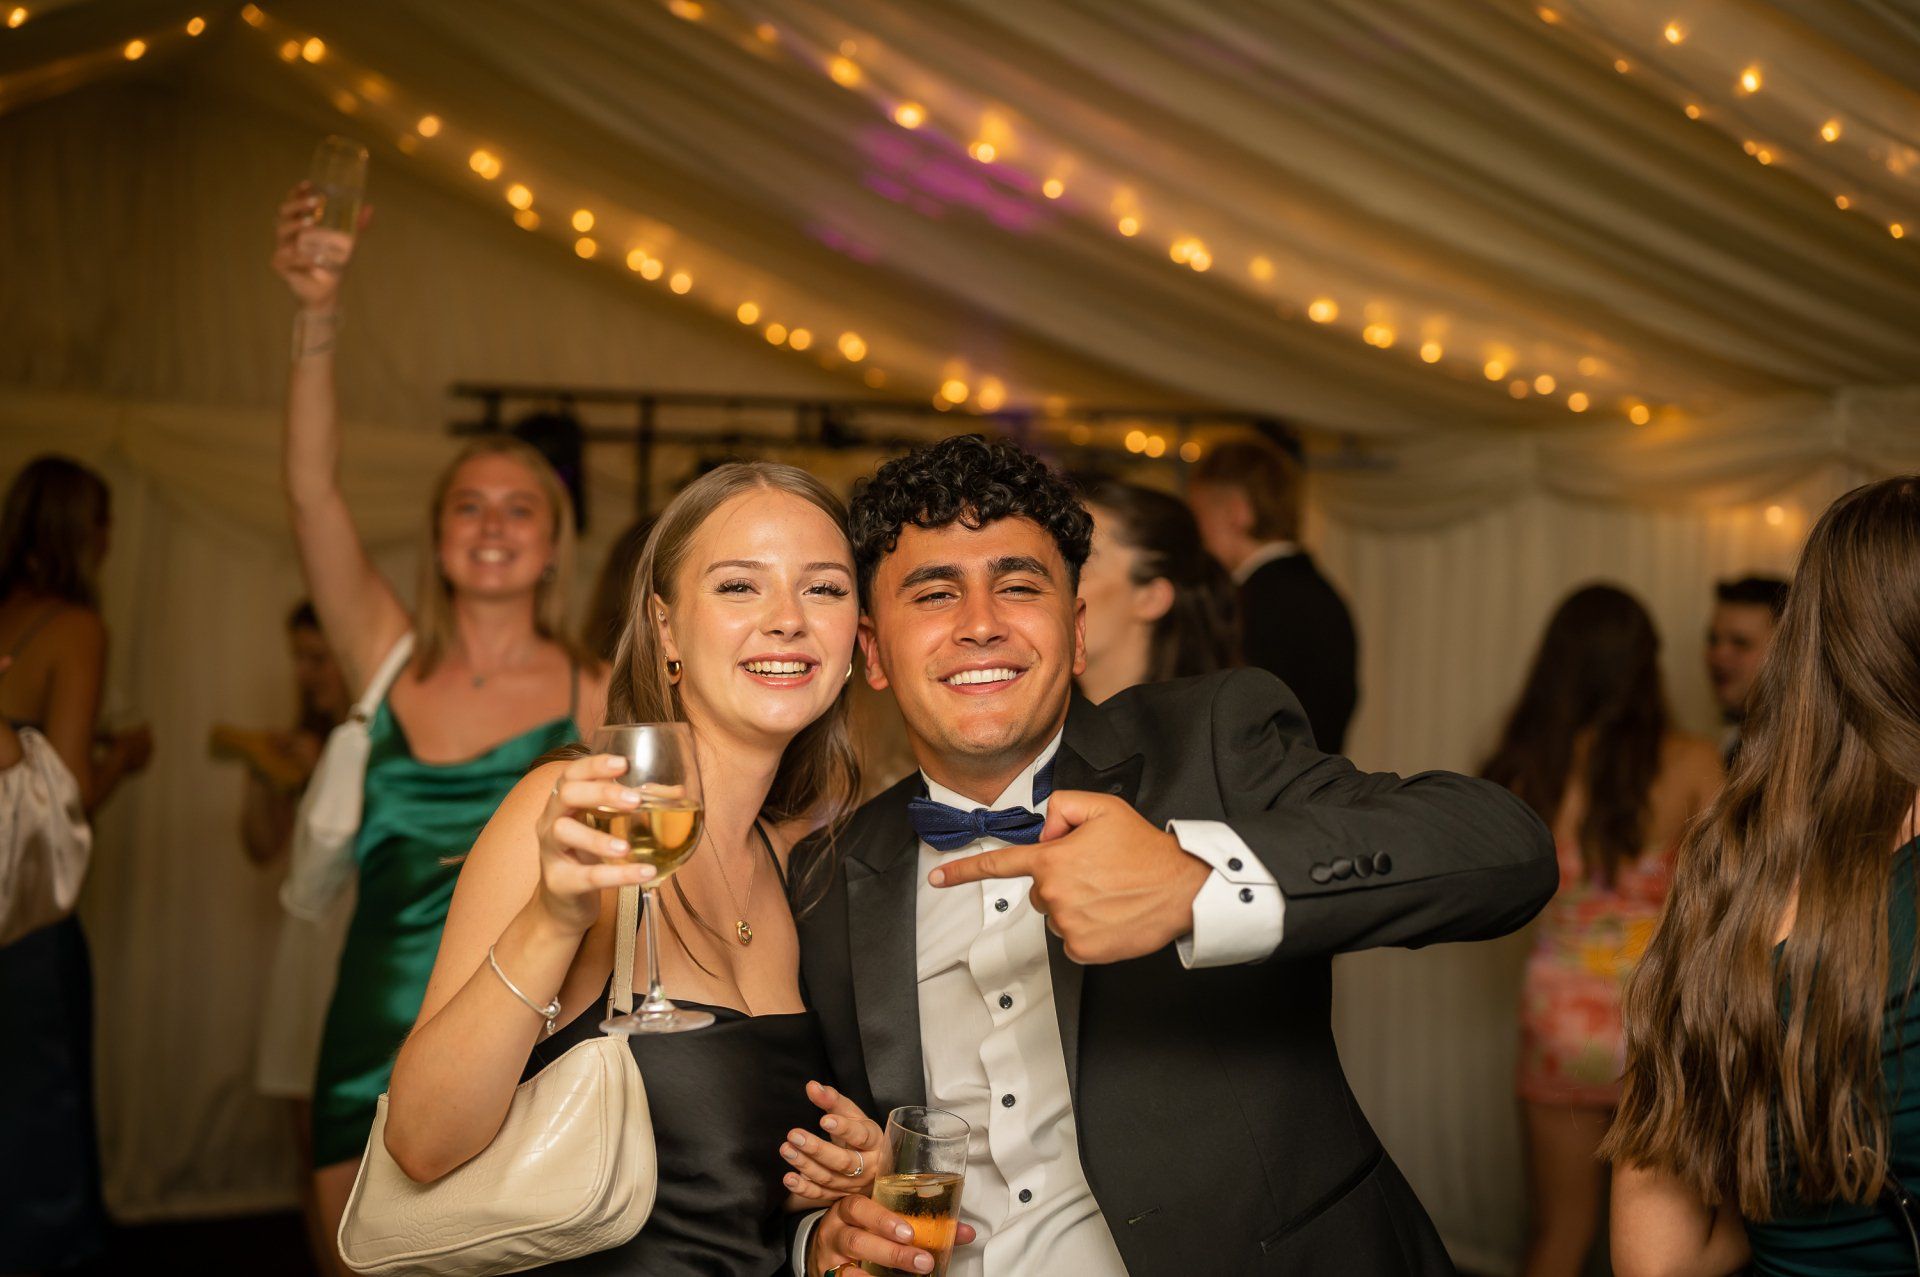 Image of people at a formal gathering which was a 21st birthday party with a girl & young man in the foreground each holding drinks.